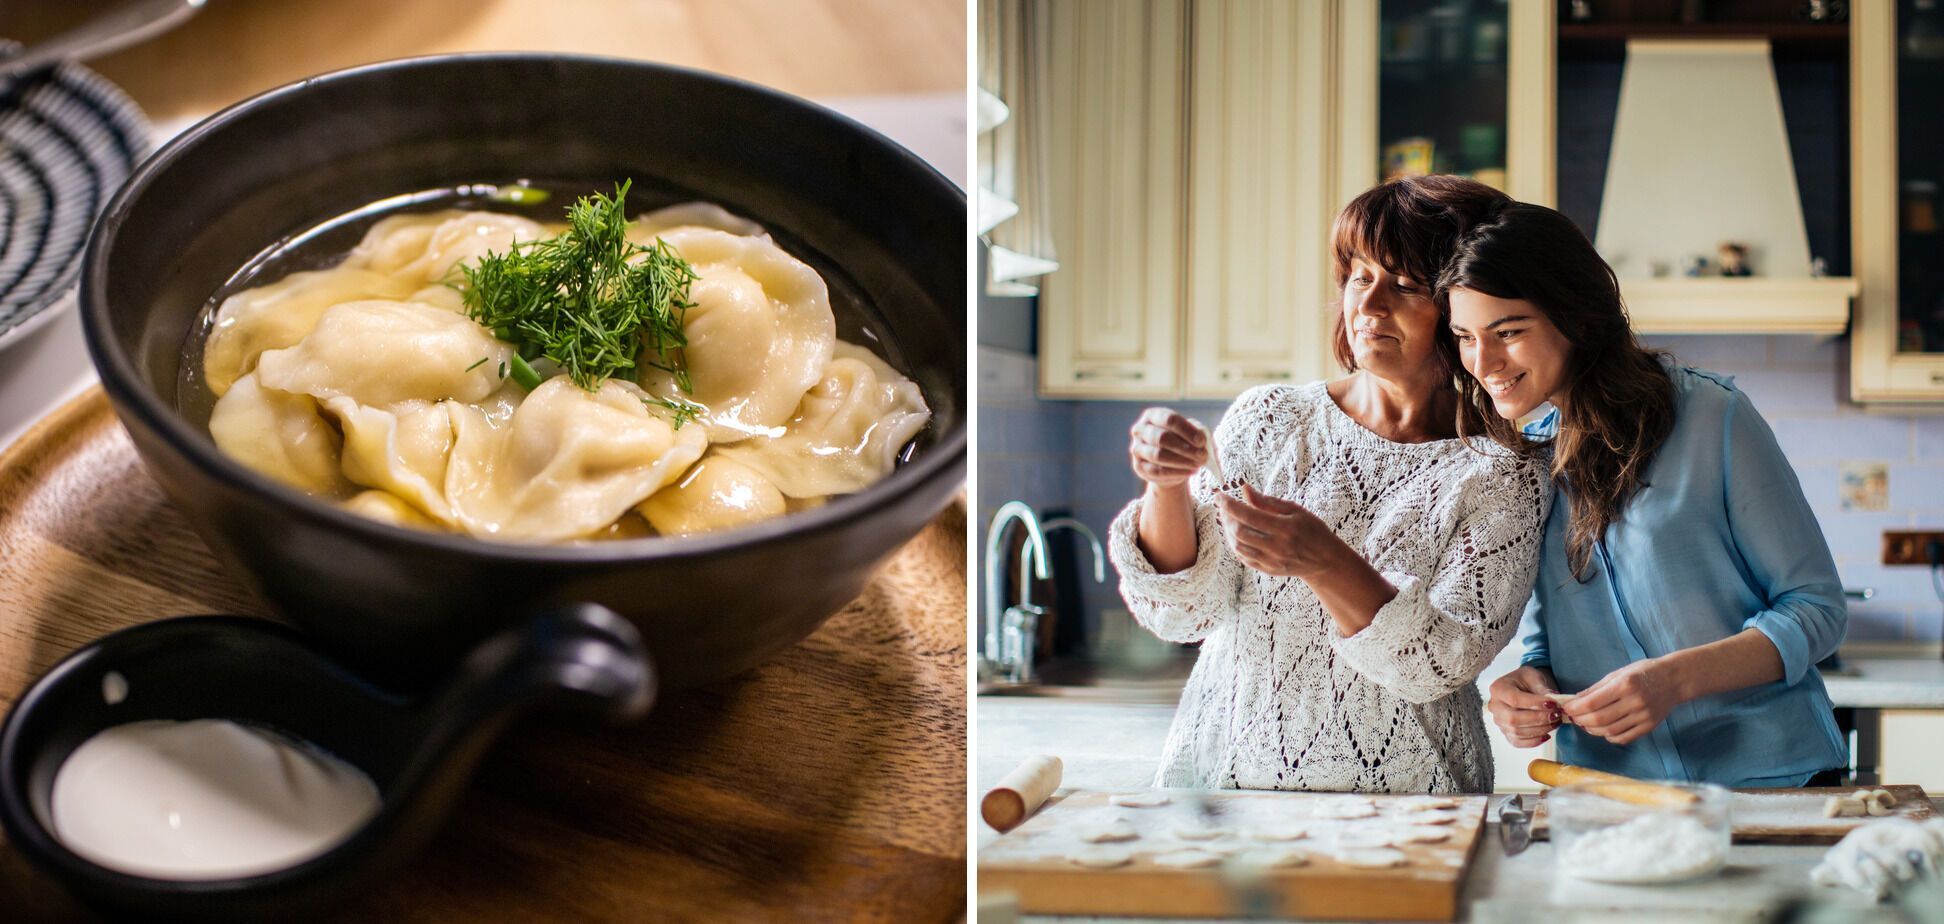 How to cook dumplings without boiling